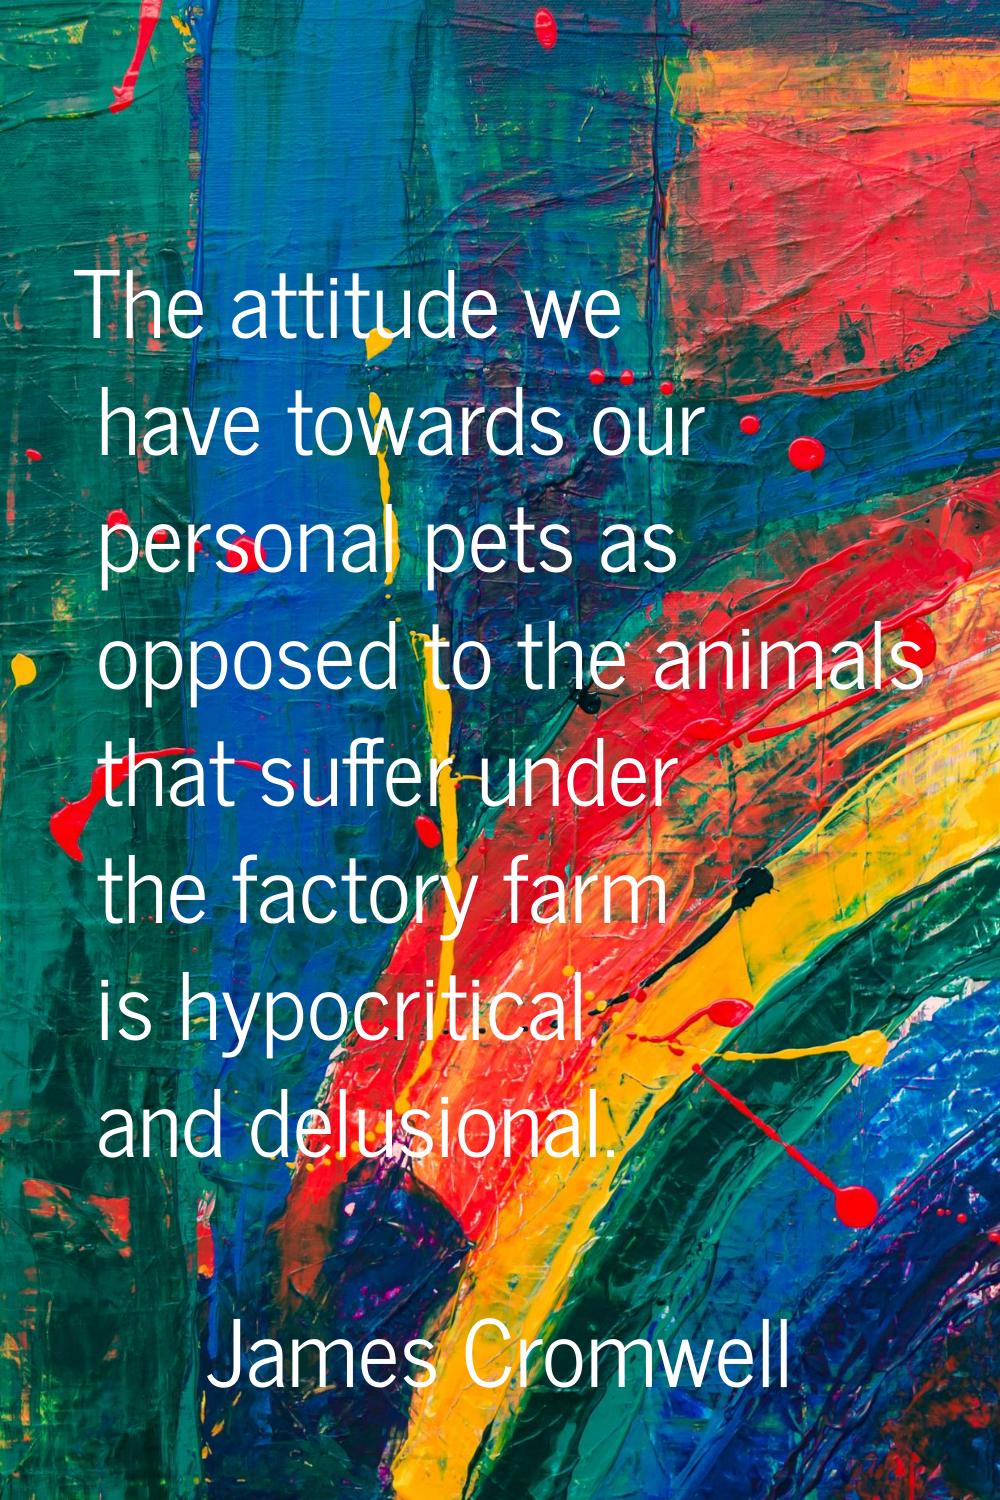 The attitude we have towards our personal pets as opposed to the animals that suffer under the fact